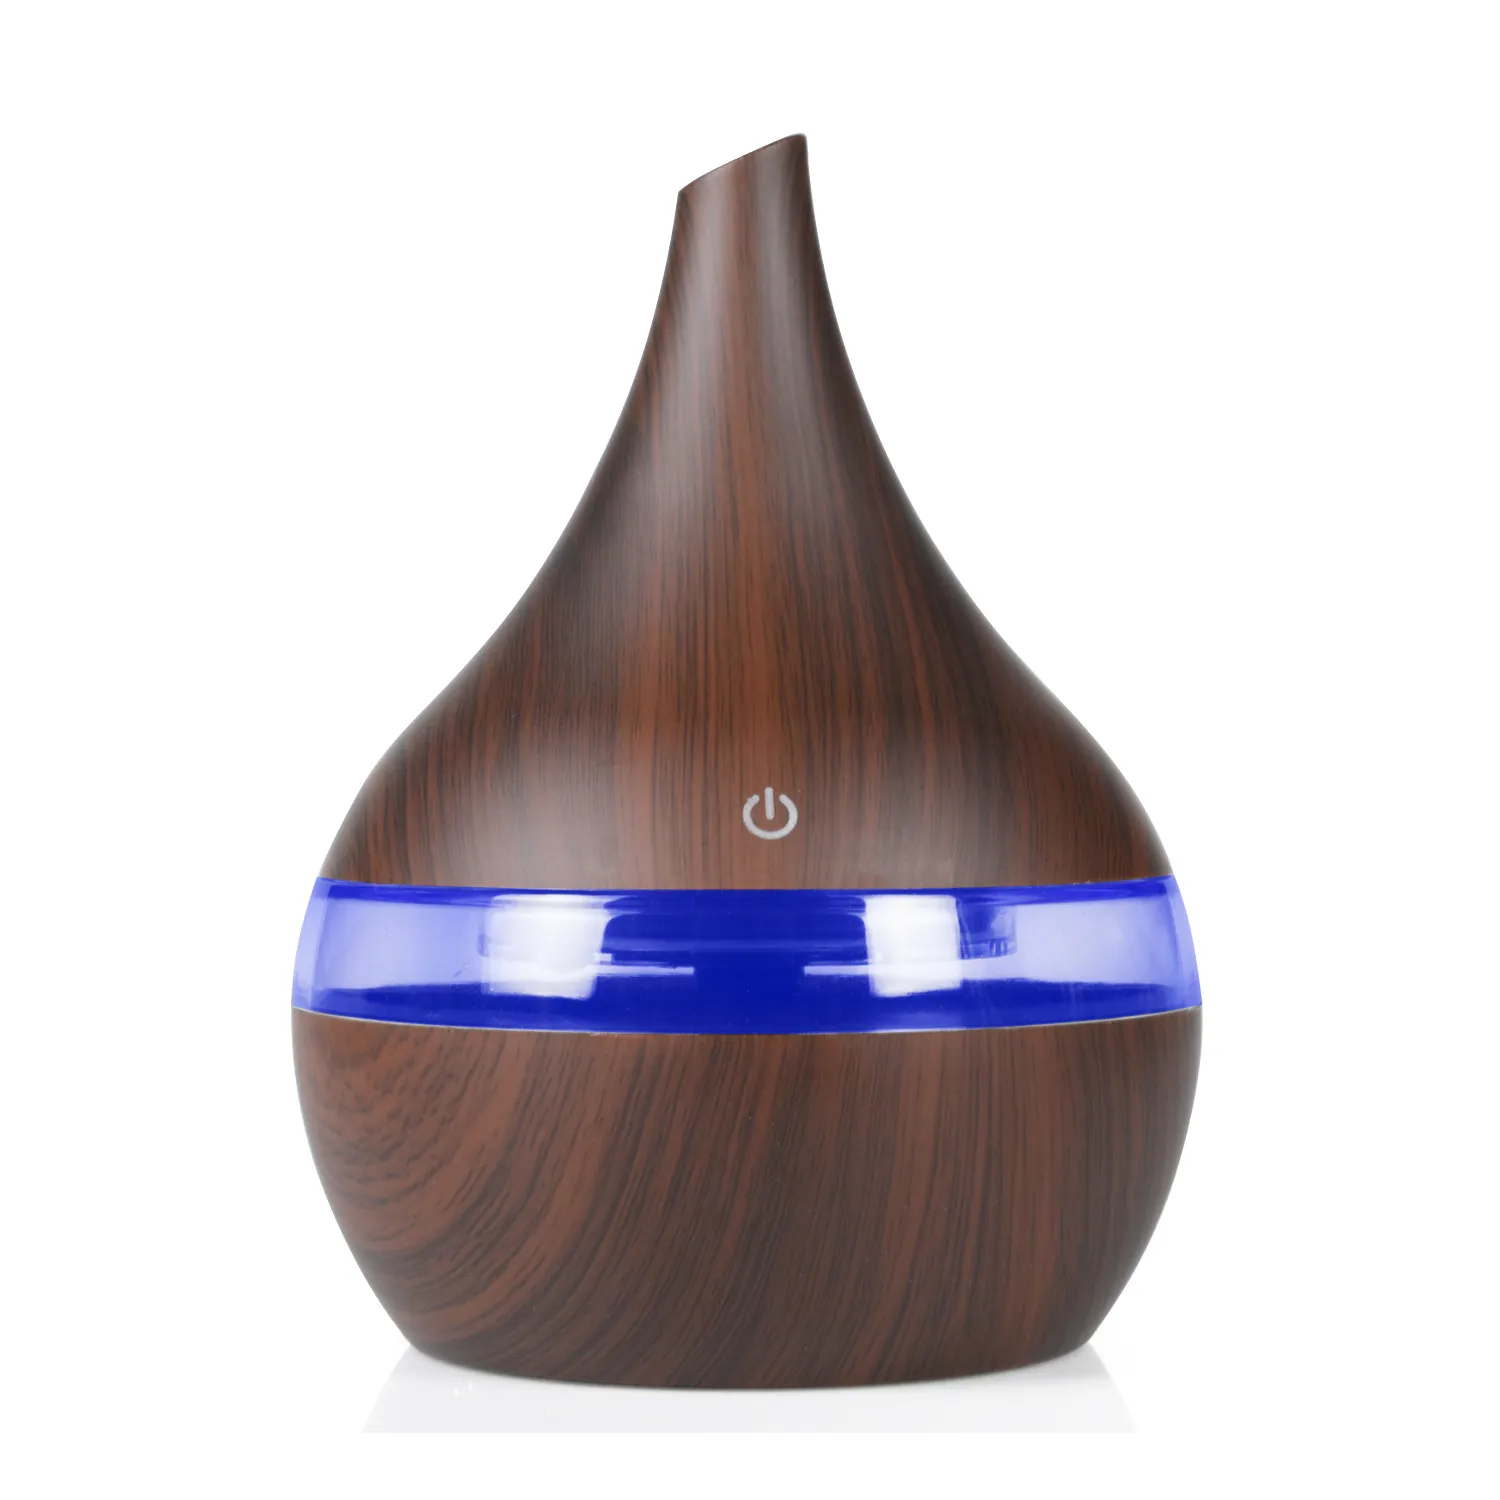 Top Humidifiers 300ml USB Electric Aroma Air Diffuser Wood Ultrasonic Humidifier  Essential Oil Aromatherapy Cool Mist Maker For Home From Camara_top_store,  $8.42